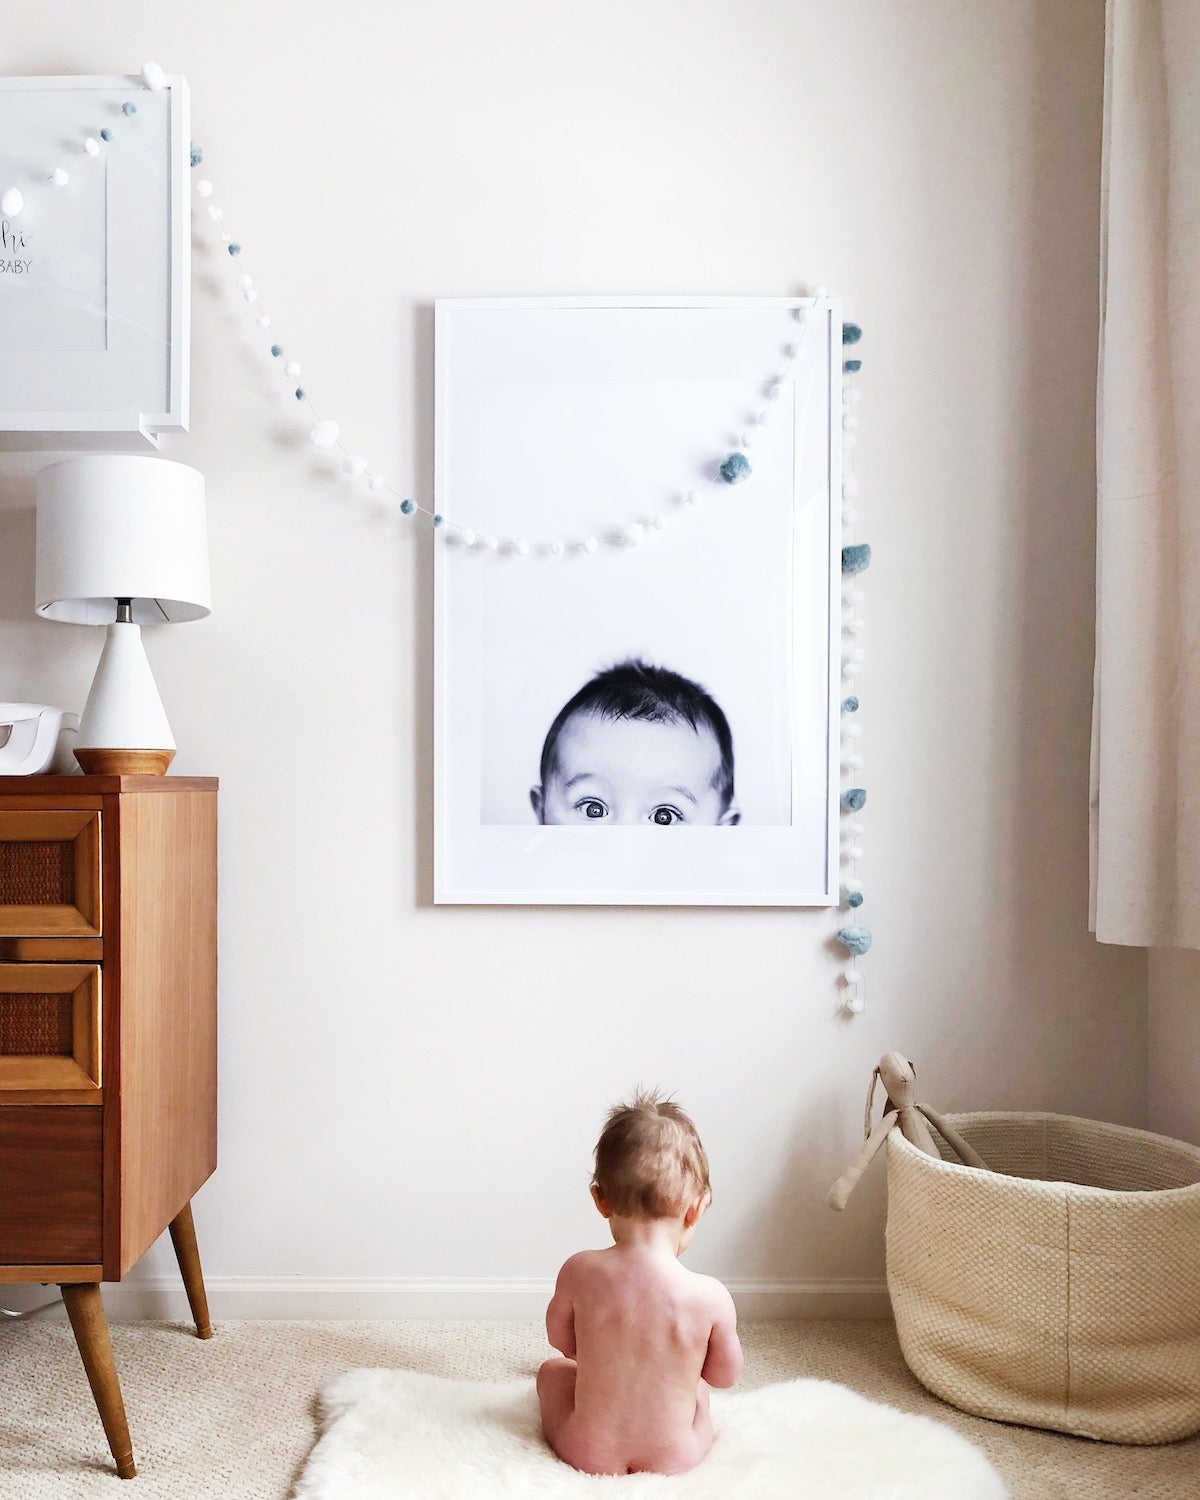 Baby sitting in front of large format print of its own portrait